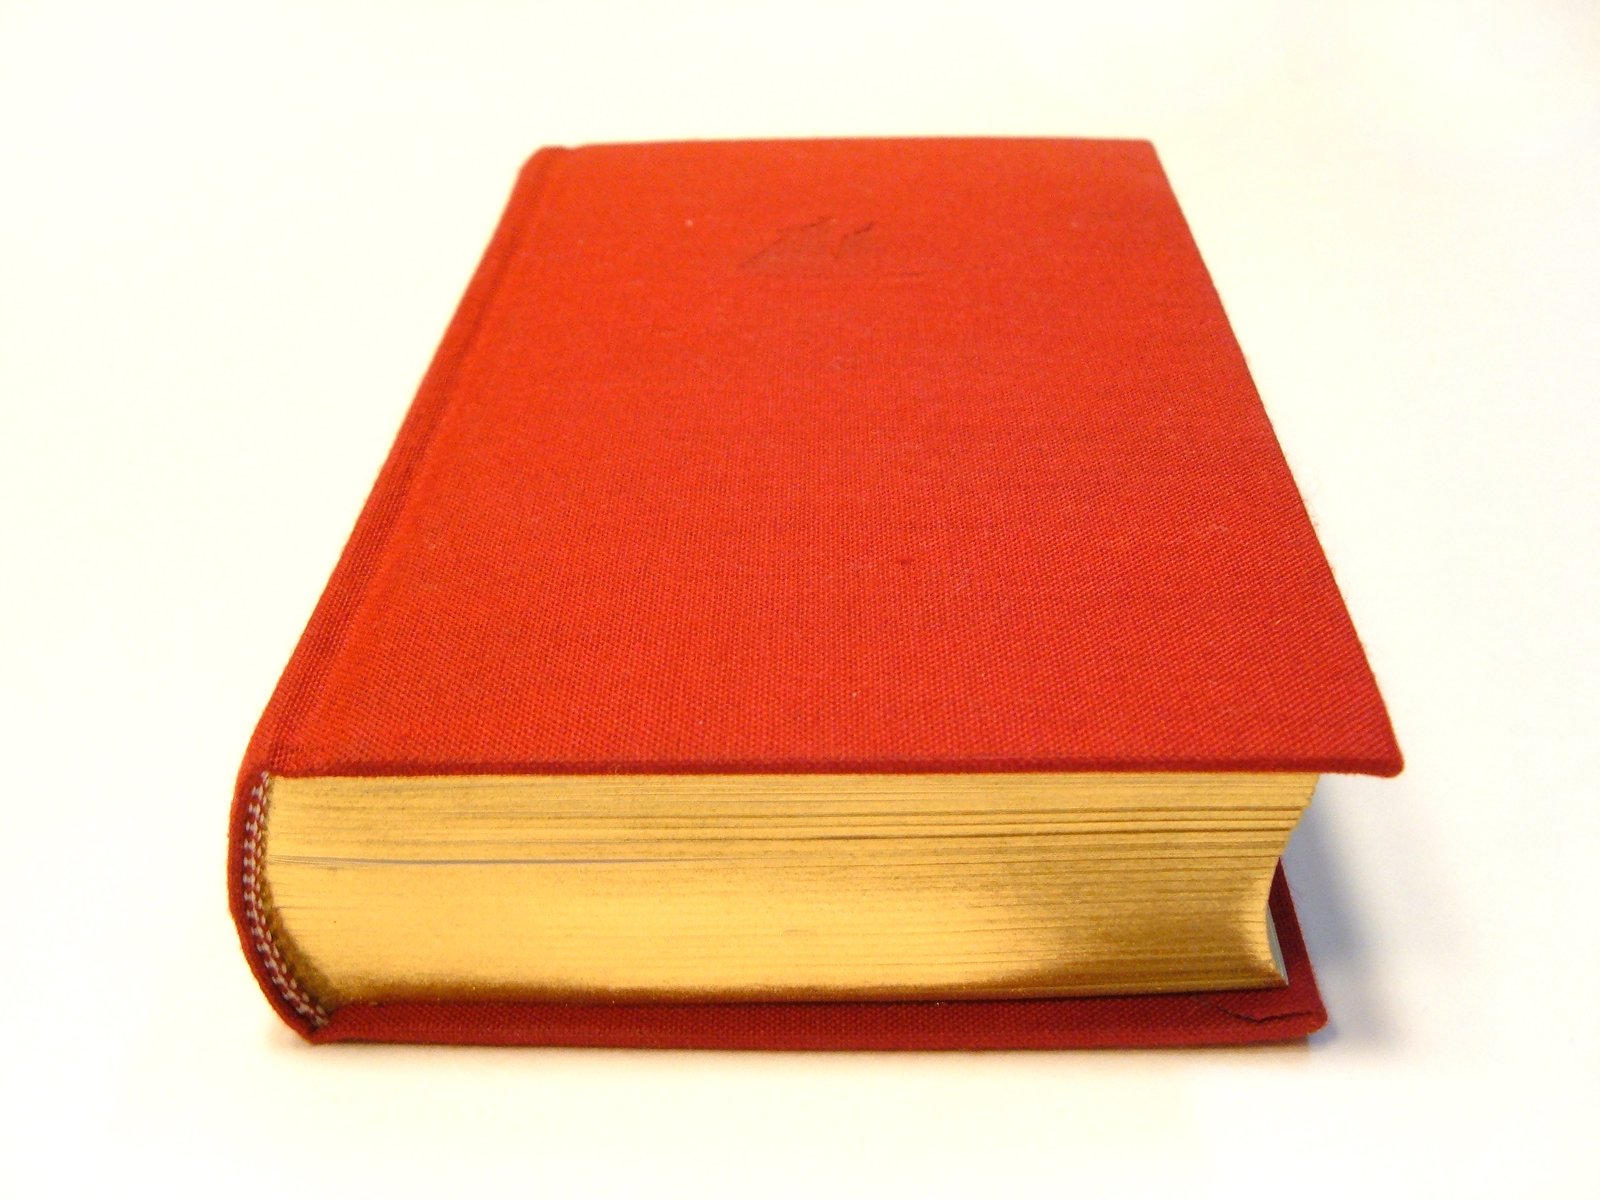 the cover of a red book with gold trim